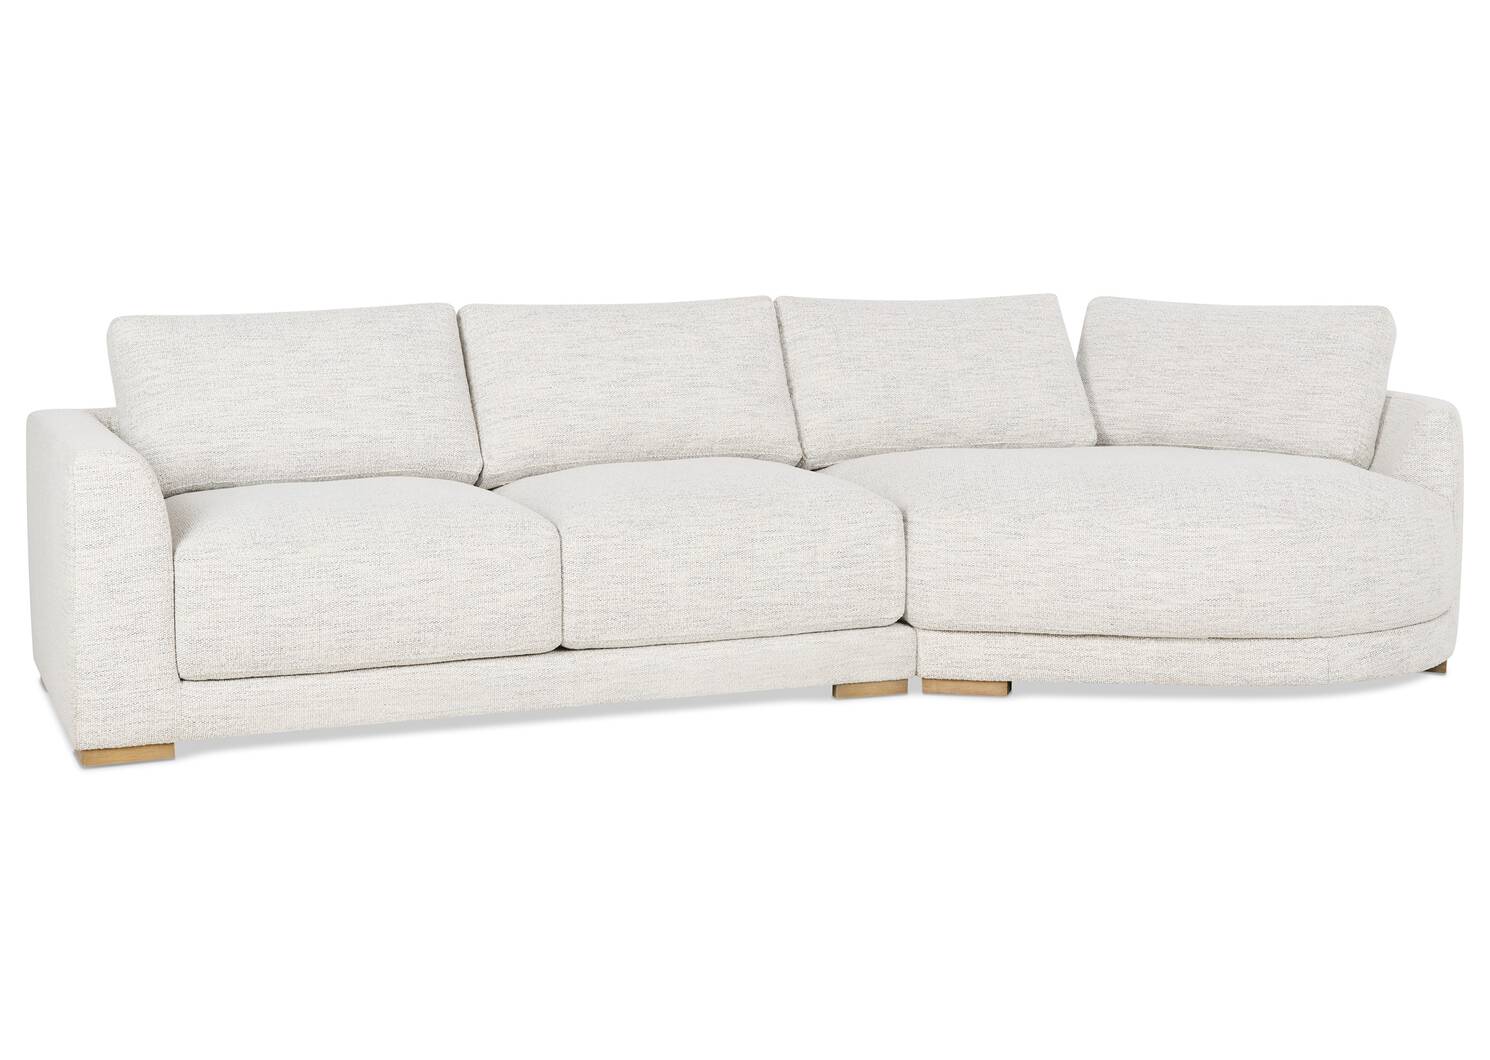 Anderson Sofa Chaise -Luly Pepper, RCF